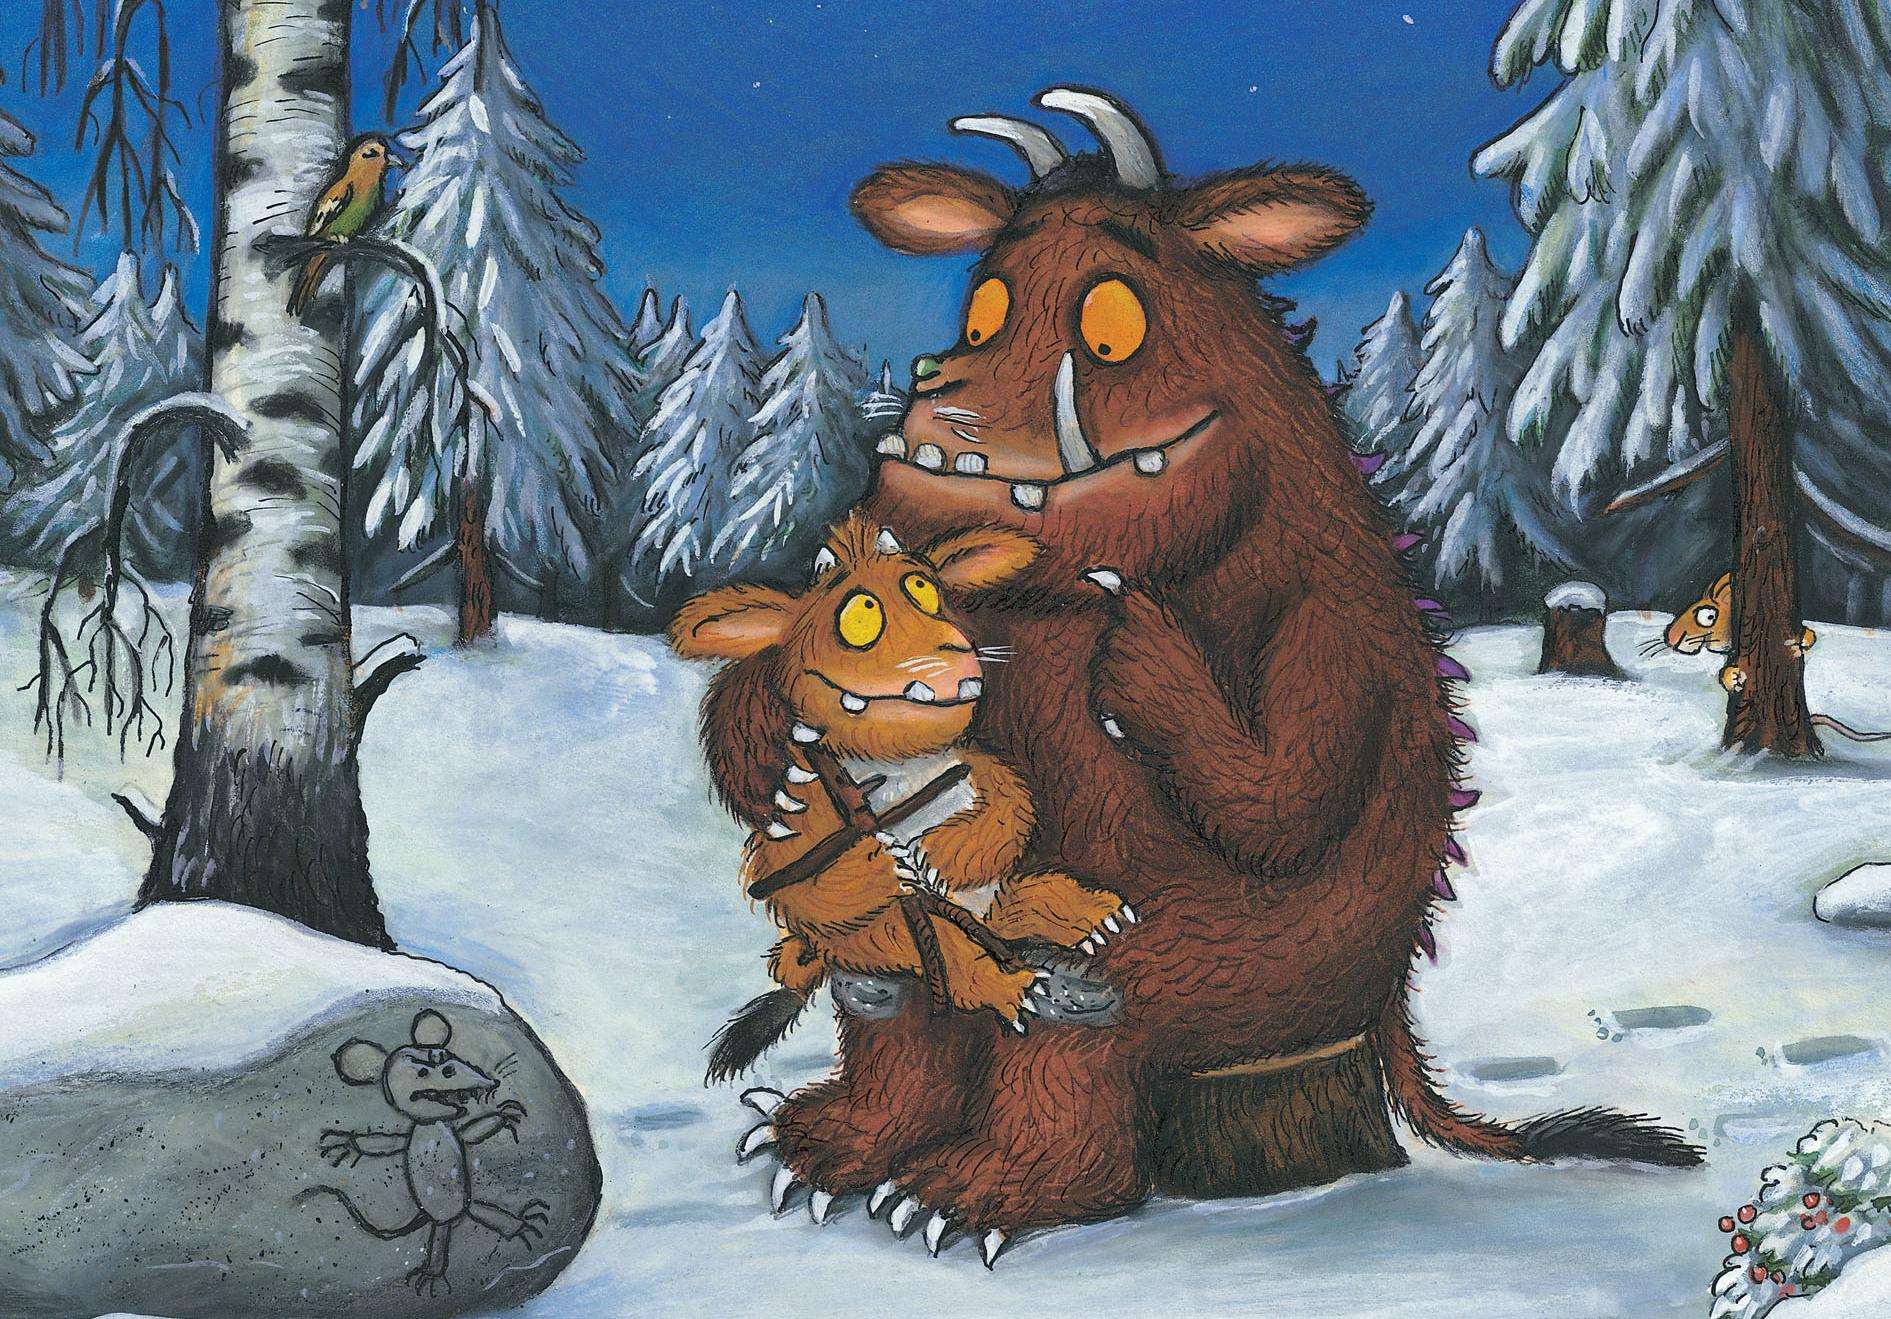 The Gruffalo's child promises fun for children aged three and up